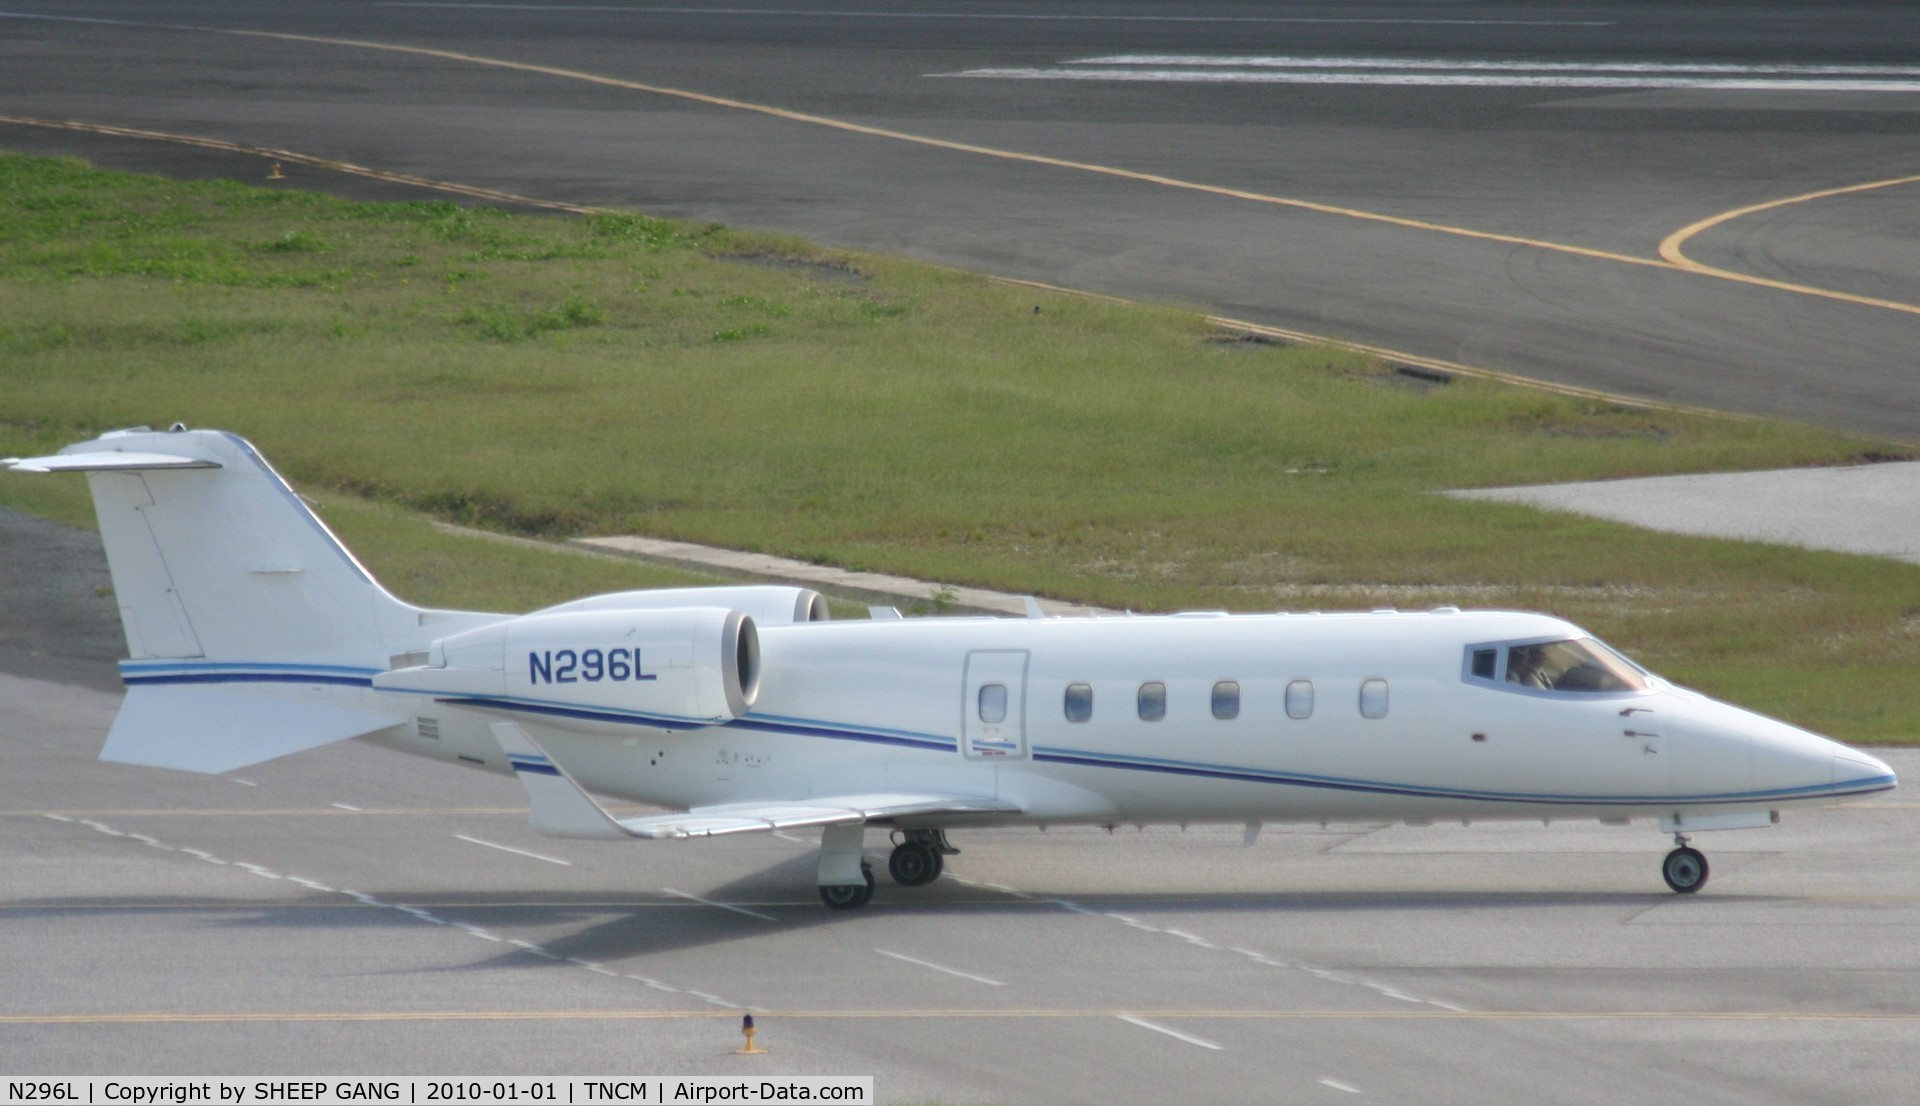 N296L, 2005 Learjet Inc 60 C/N 296, N296L with teh call sign hop a jet 96 taxing to alpha for take off runway 10 at TNCM